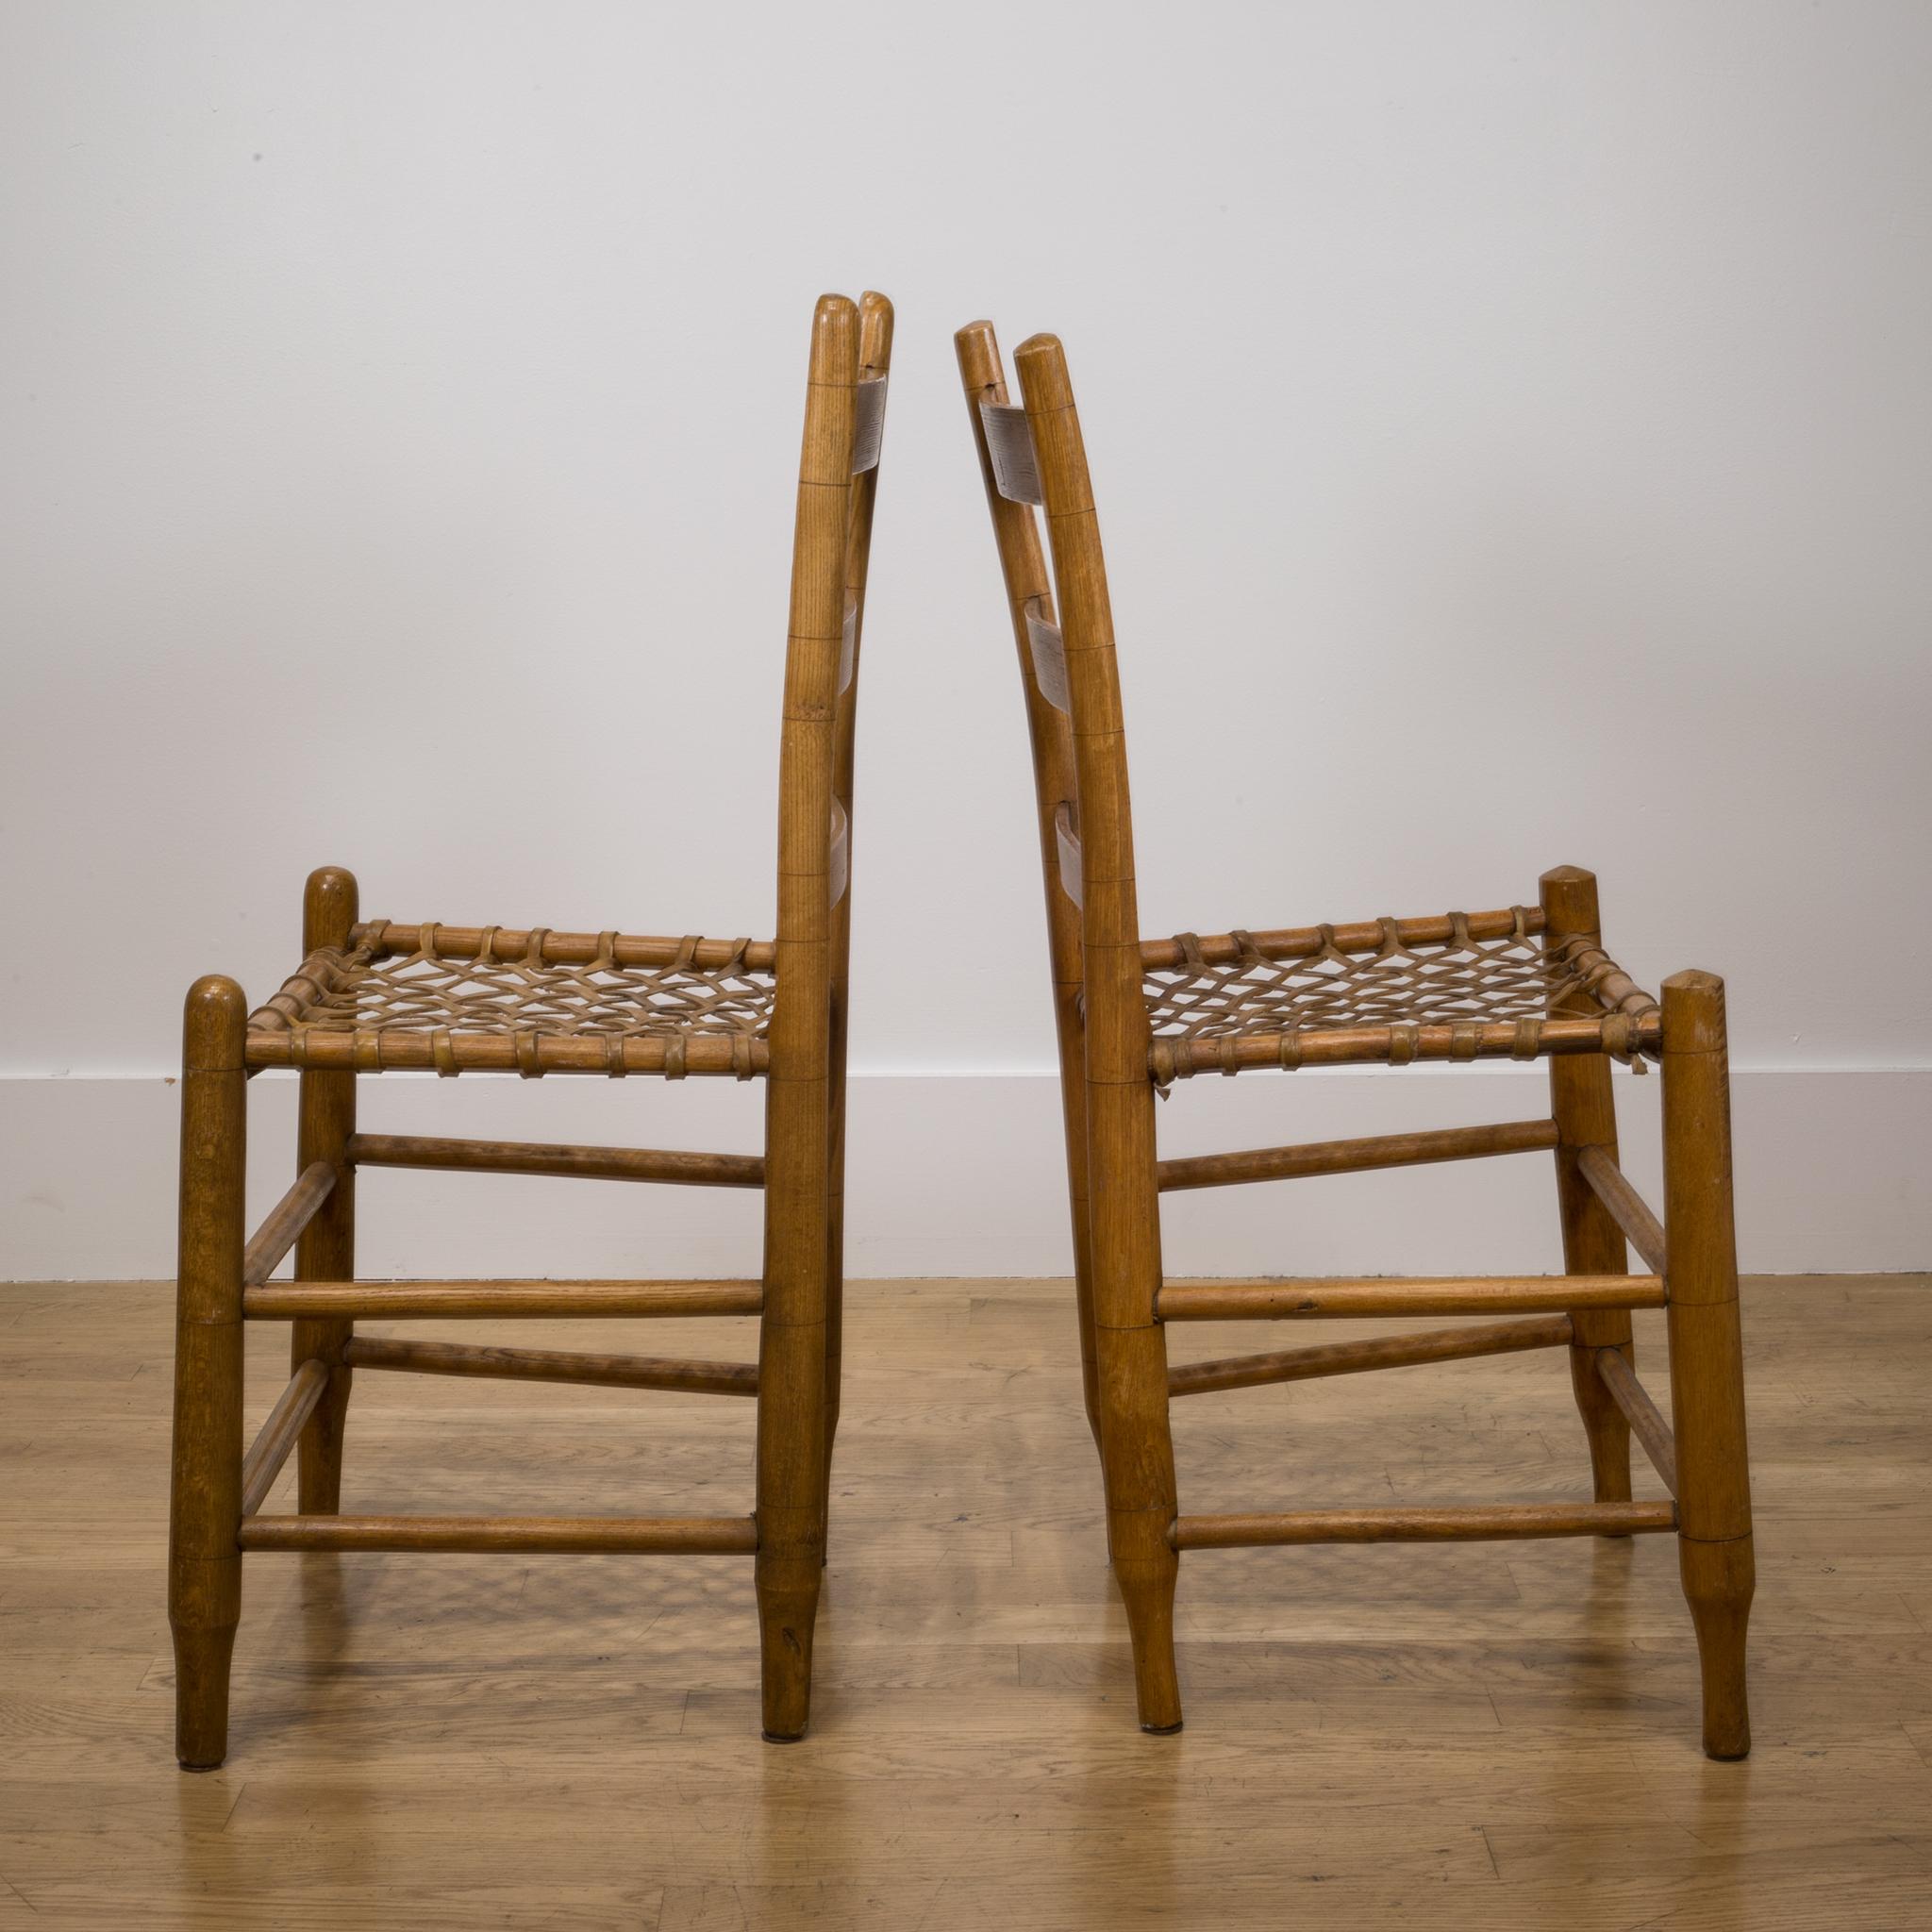 Wood 19th Century Rawhide Chairs from Historic Oregon Commune, circa 1856